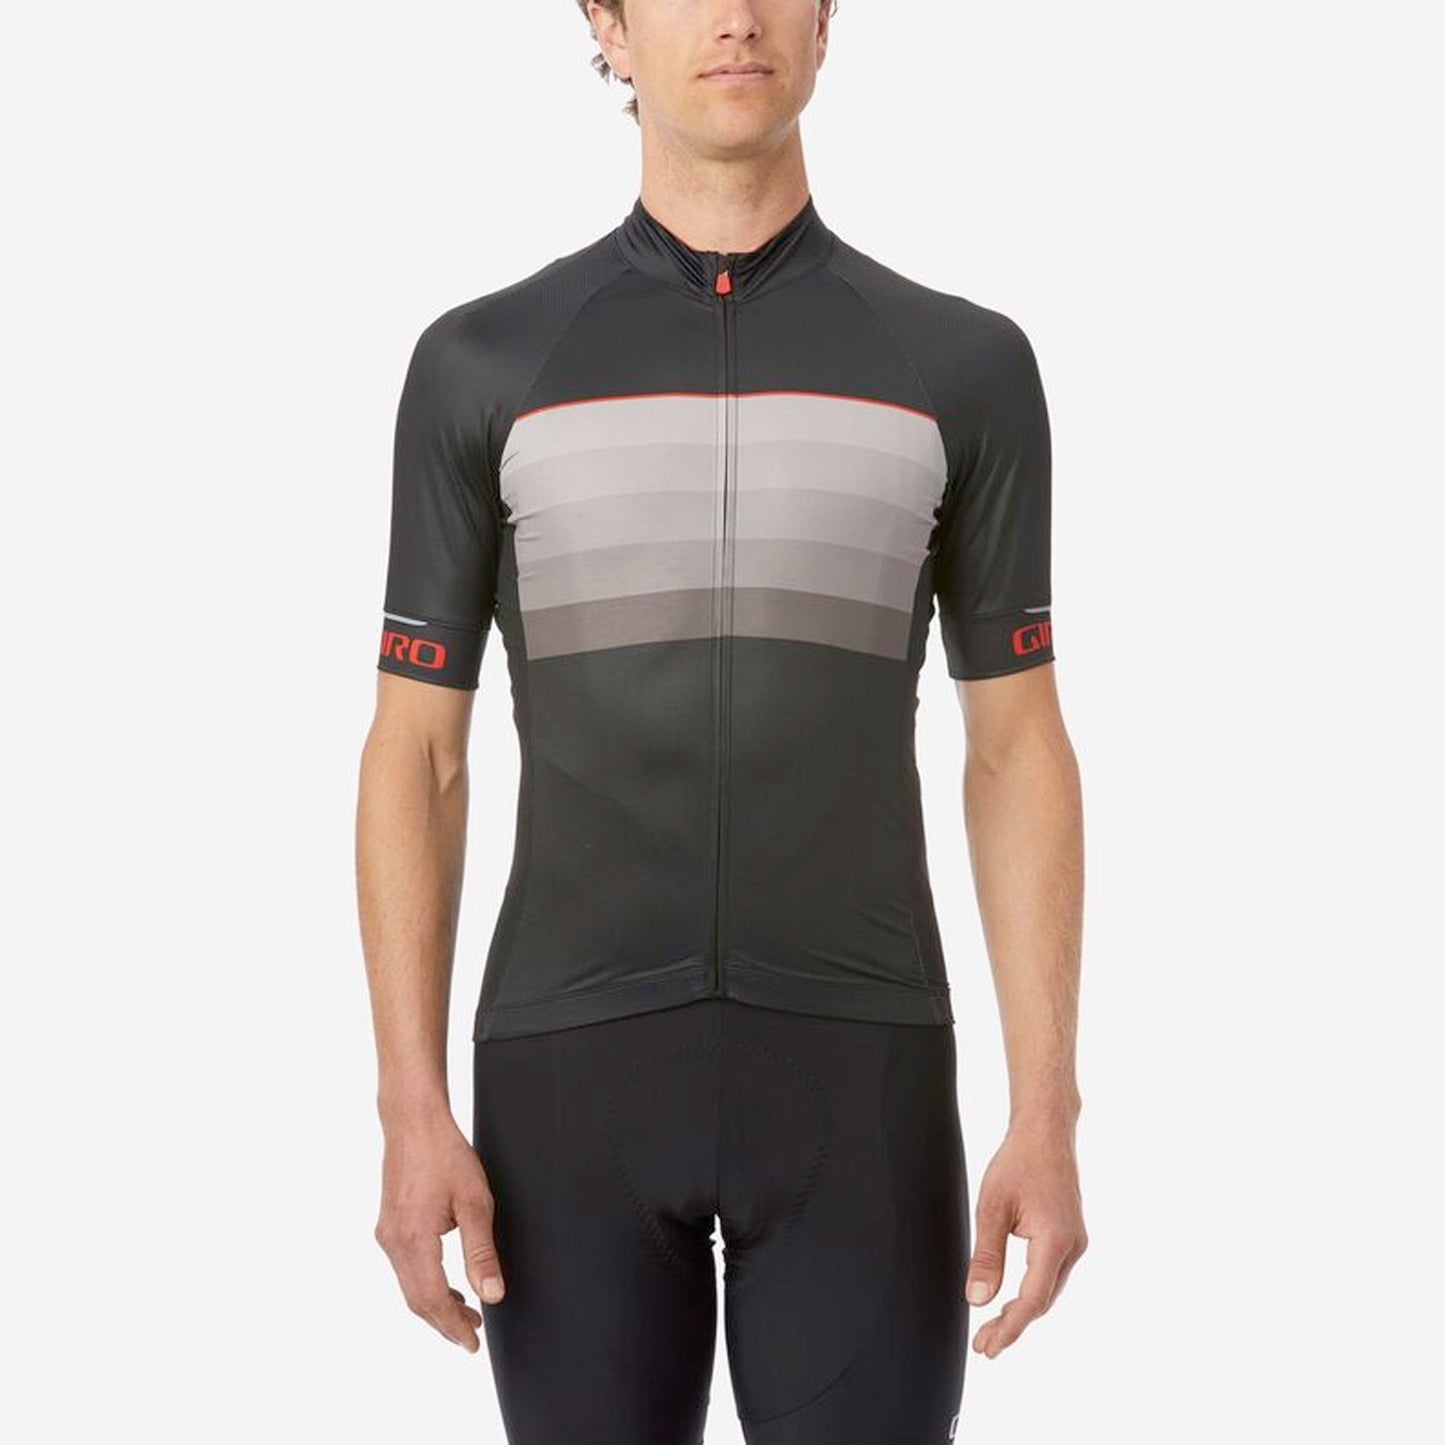 Giro Chrono Expert Mens Jersey, Black/Red Horizon buy at Woolys Wheels with free delivery!